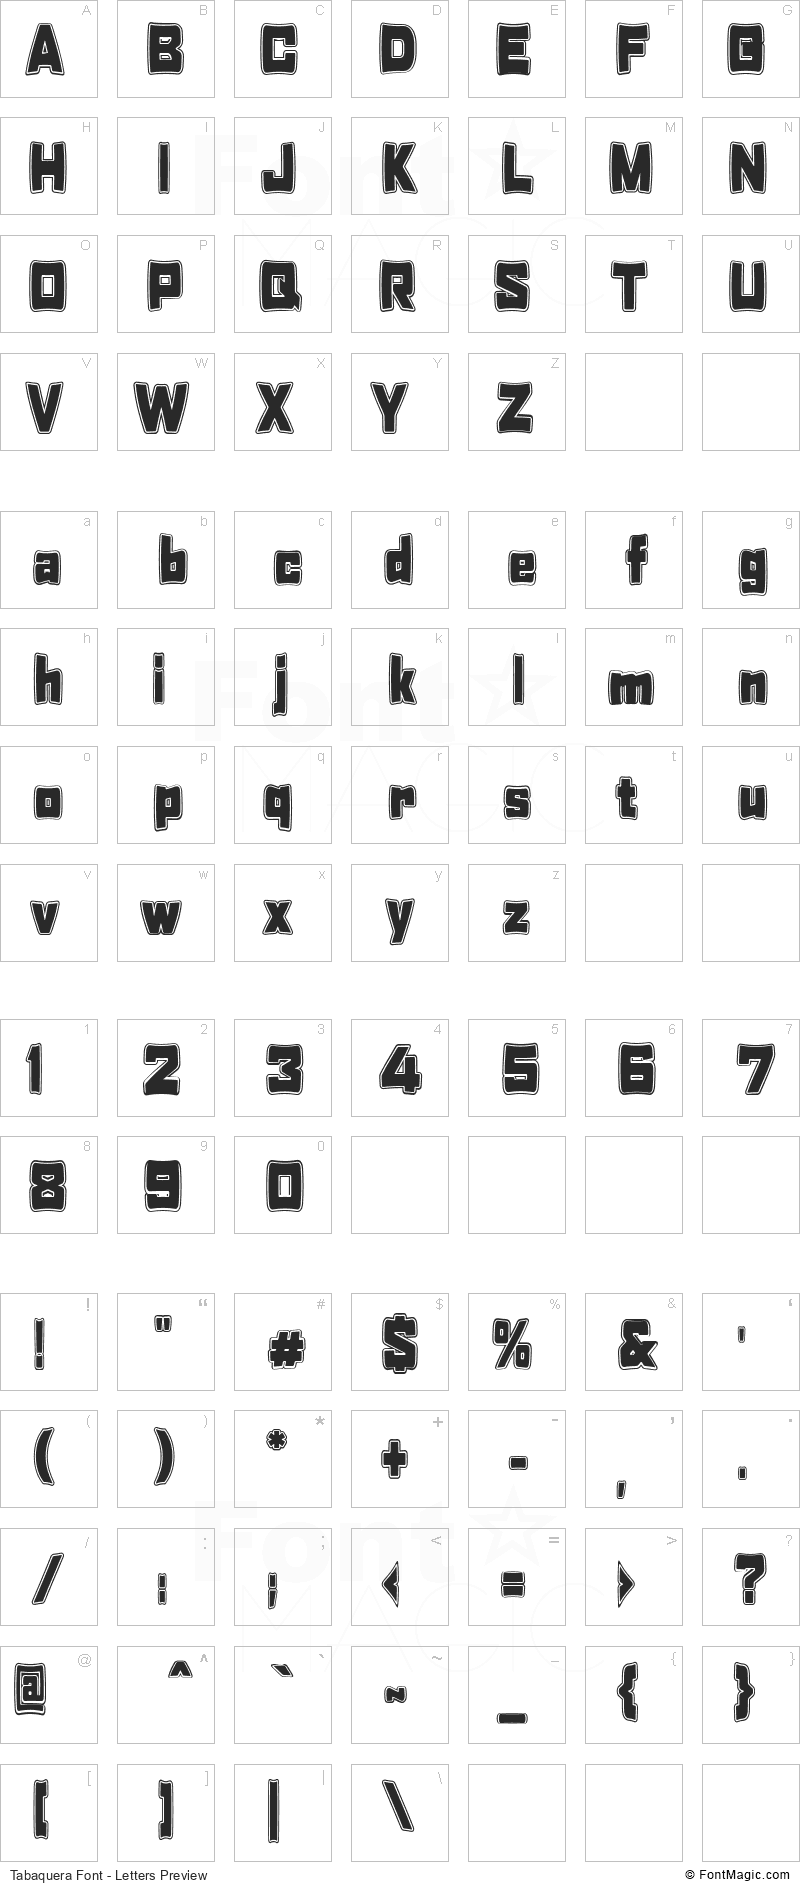 Tabaquera Font - All Latters Preview Chart